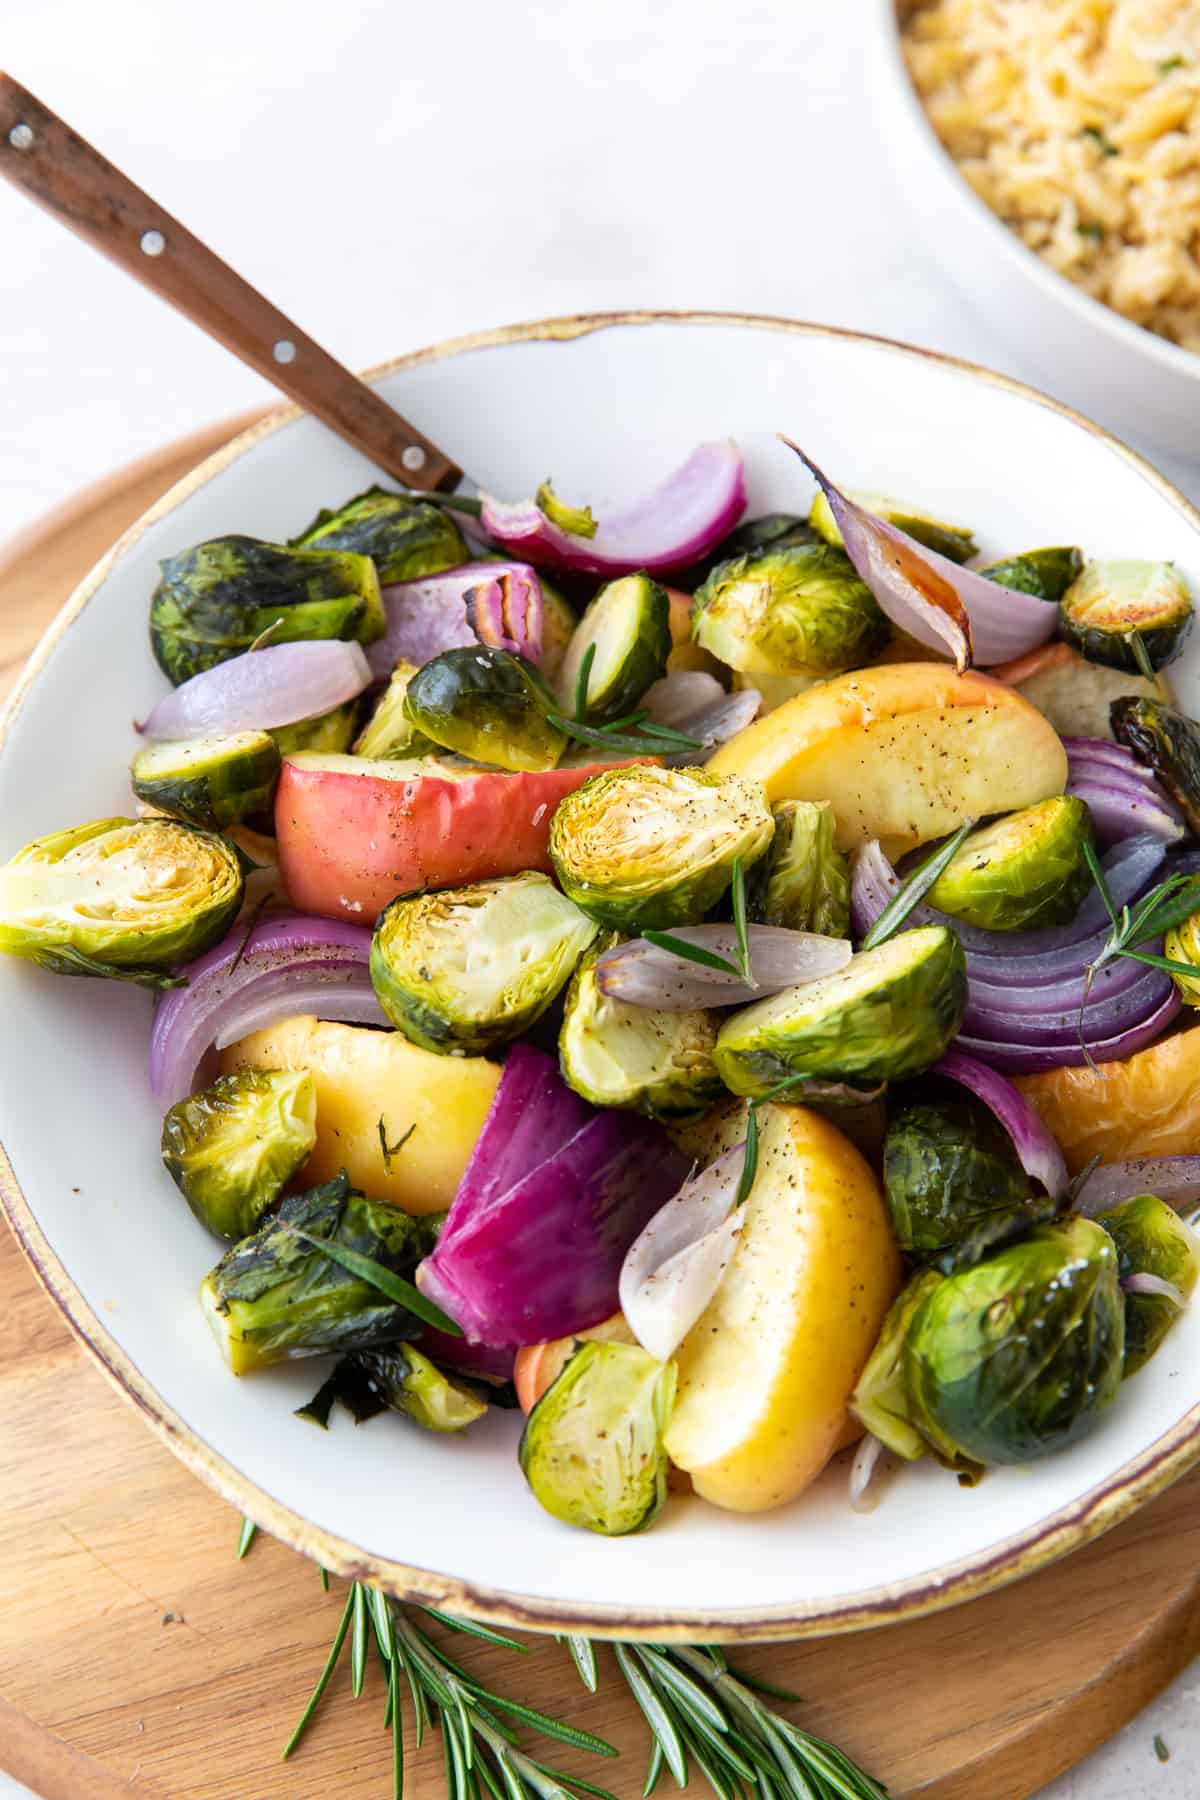 Roasted Brussels sprouts, apples, and red onion in a serving bowl with a spoon.